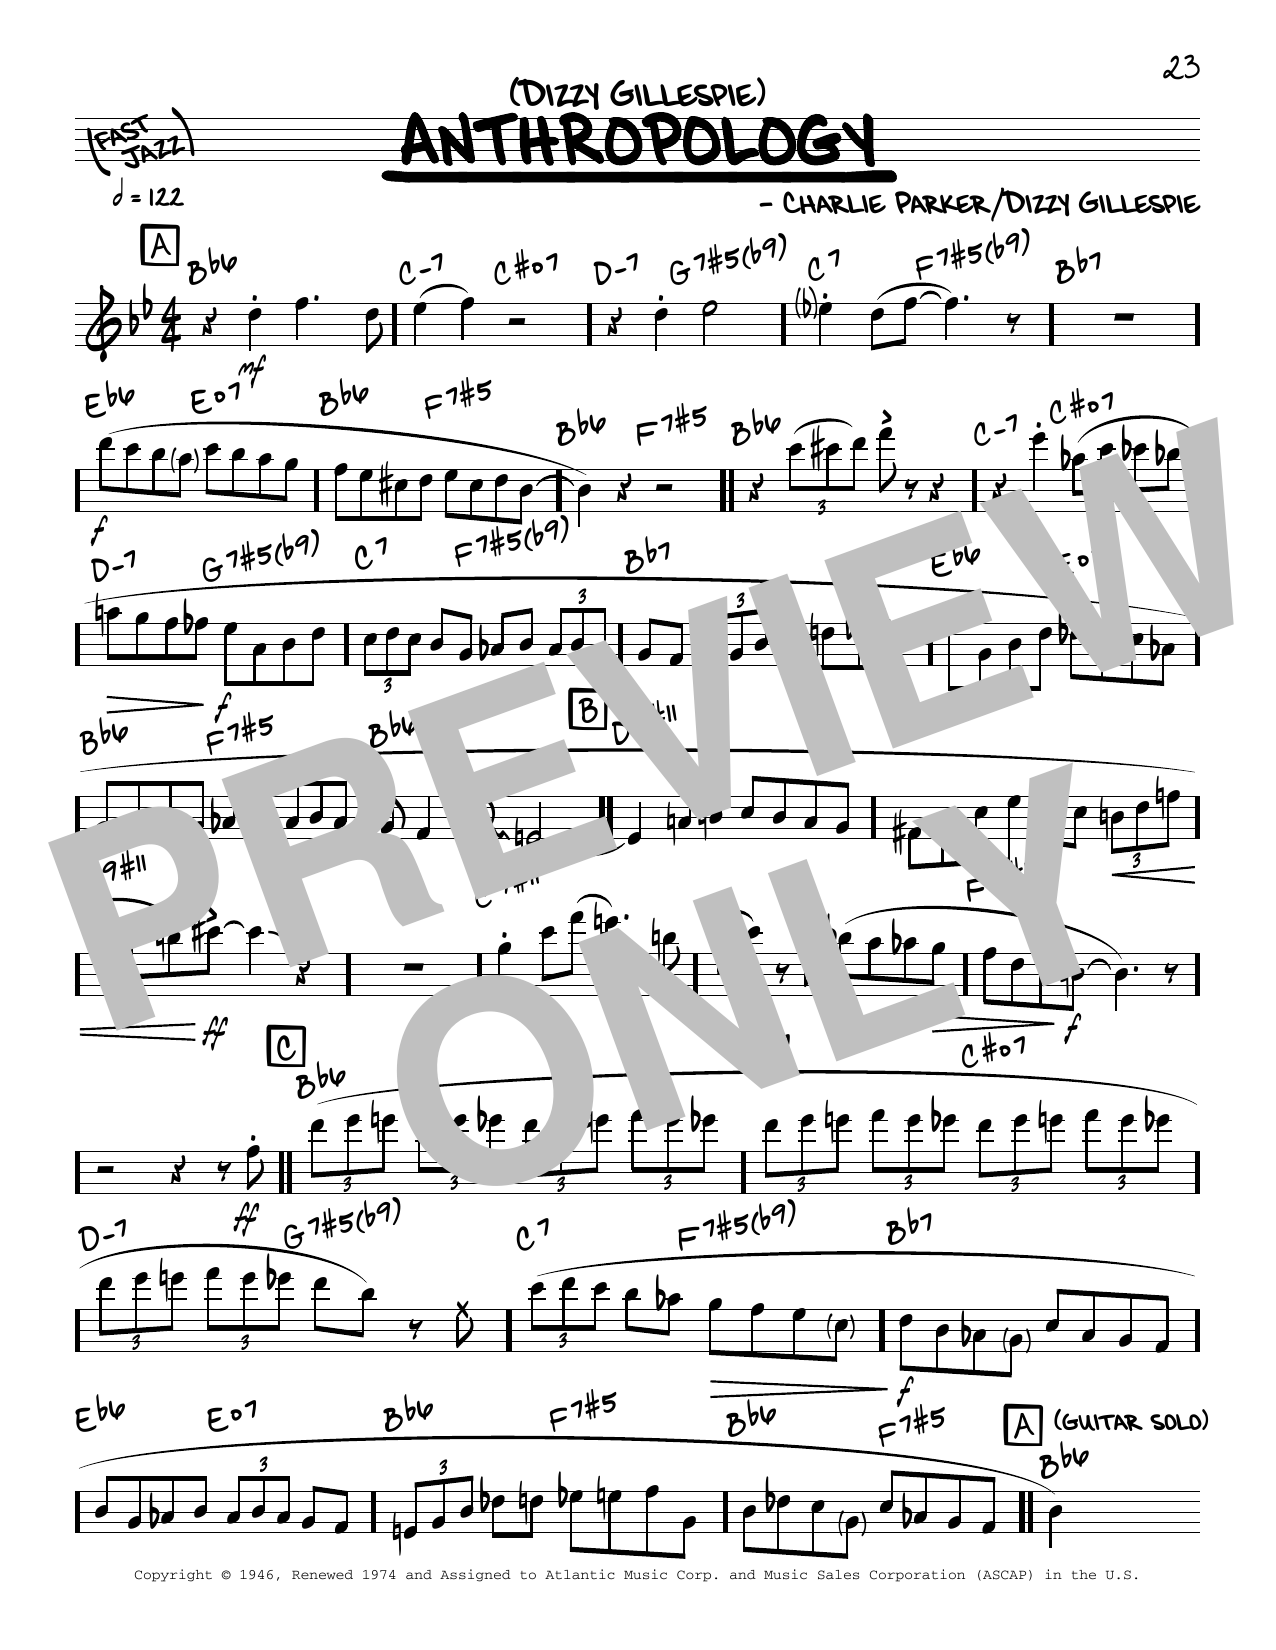 Download Dizzy Gillespie Anthropology (solo only) Sheet Music